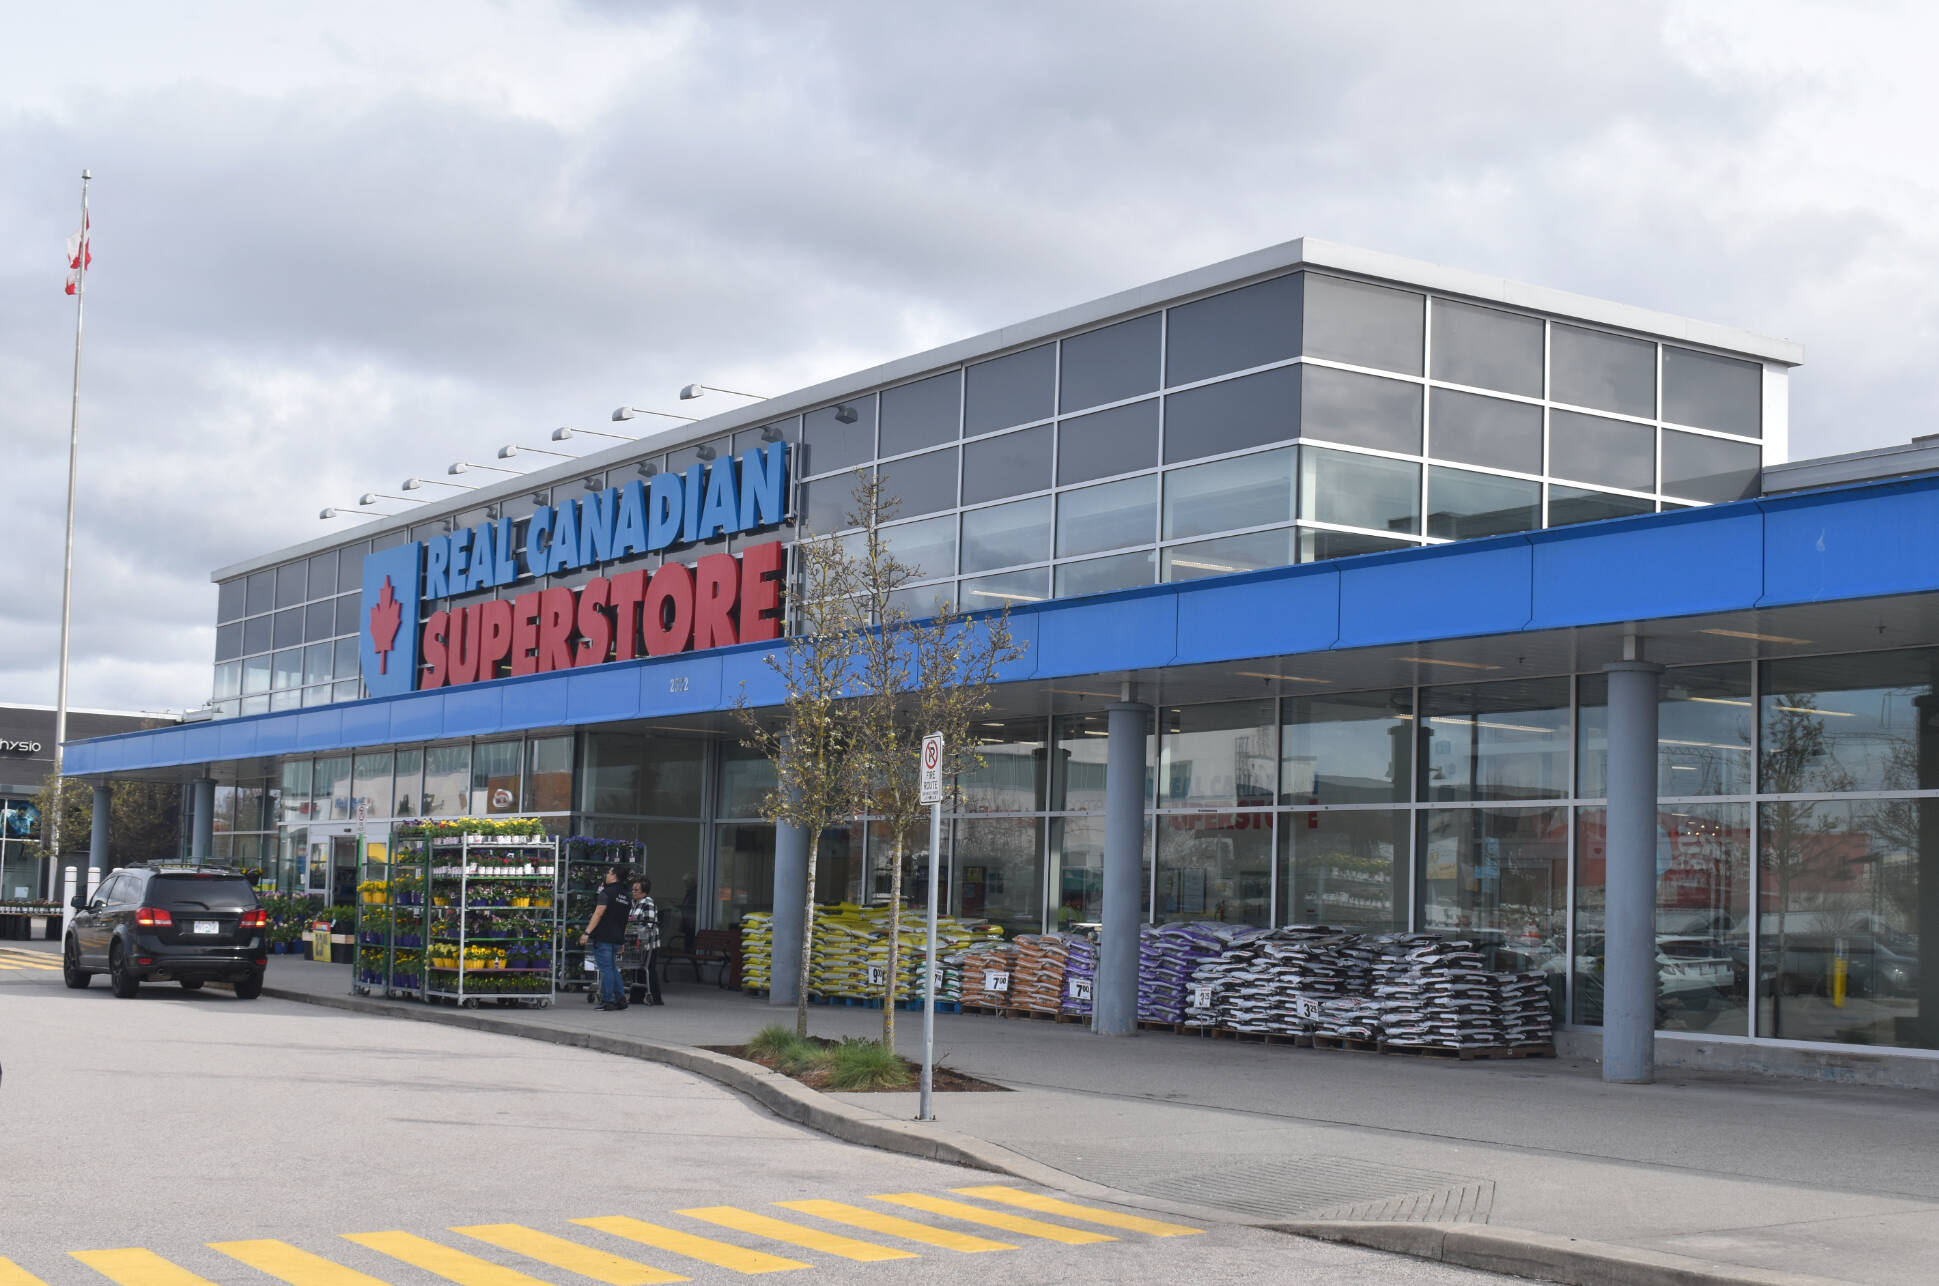 Loblaws has been fined $7K after an employee at the South Surrey Real Canadian Superstore sold a bottle of wine to a minor. (Alex Browne photo)